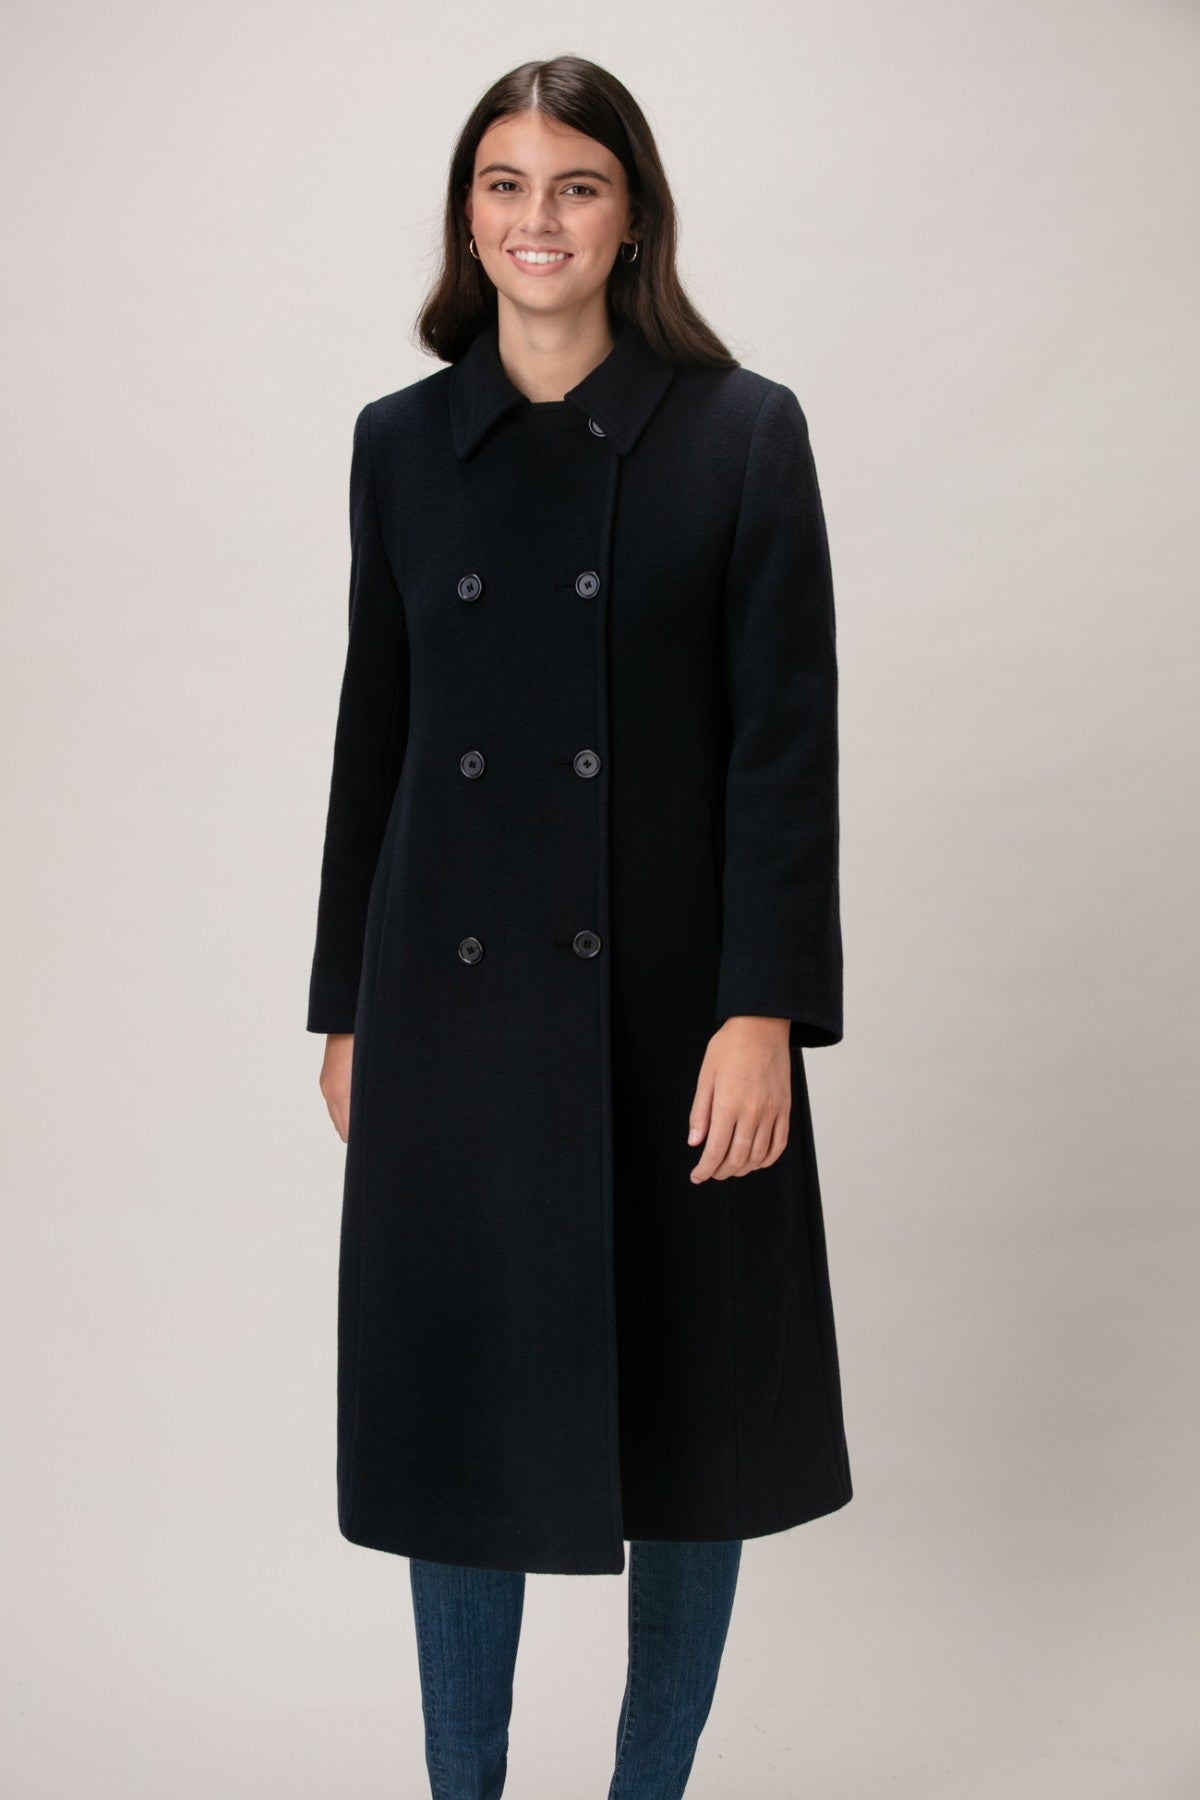 NADINE Wool & Cashmere Long Double Breasted Coat 2140C/W – LORNE'S COATS